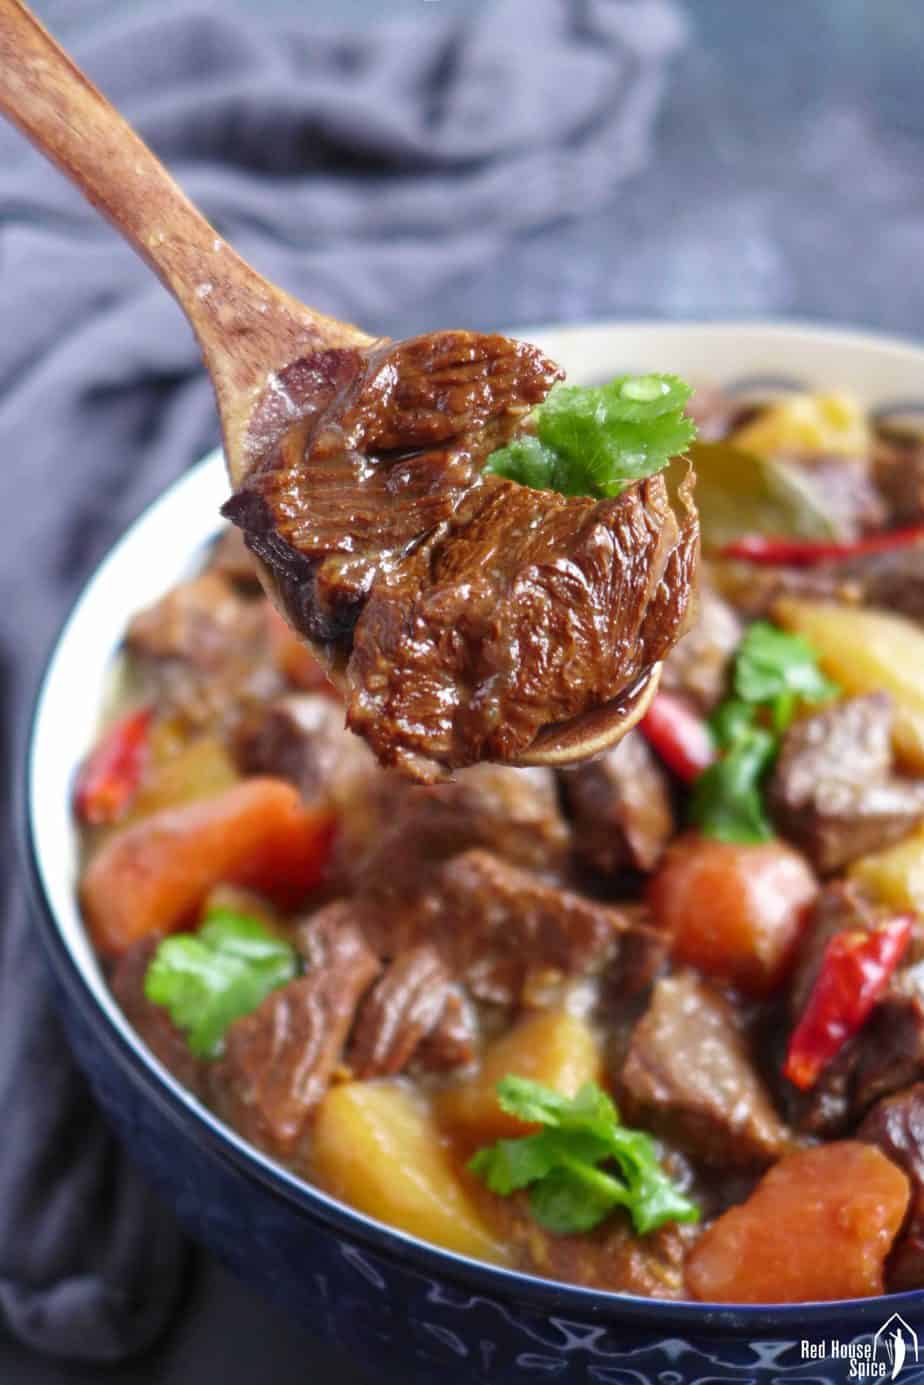 Braised beef chunks in a spoon